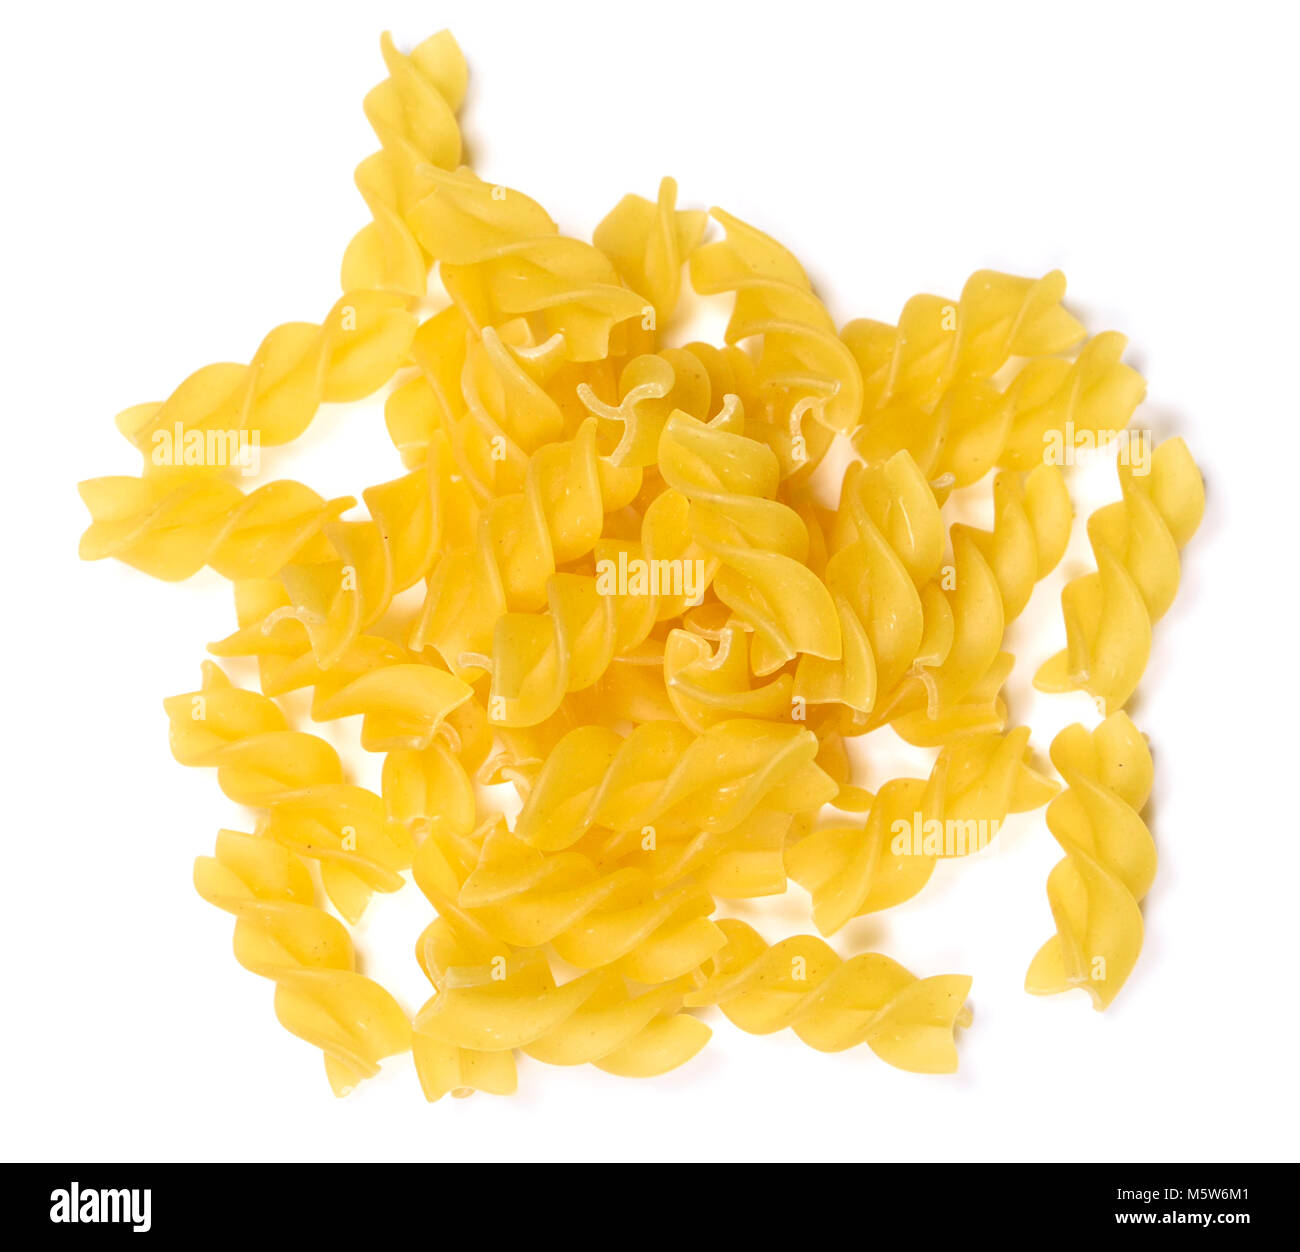 Raw pasta or dry pasta, isolated on white background. Italian pasta, fussili noodles on white with copy space. Cut out food or ingredients. Stock Photo